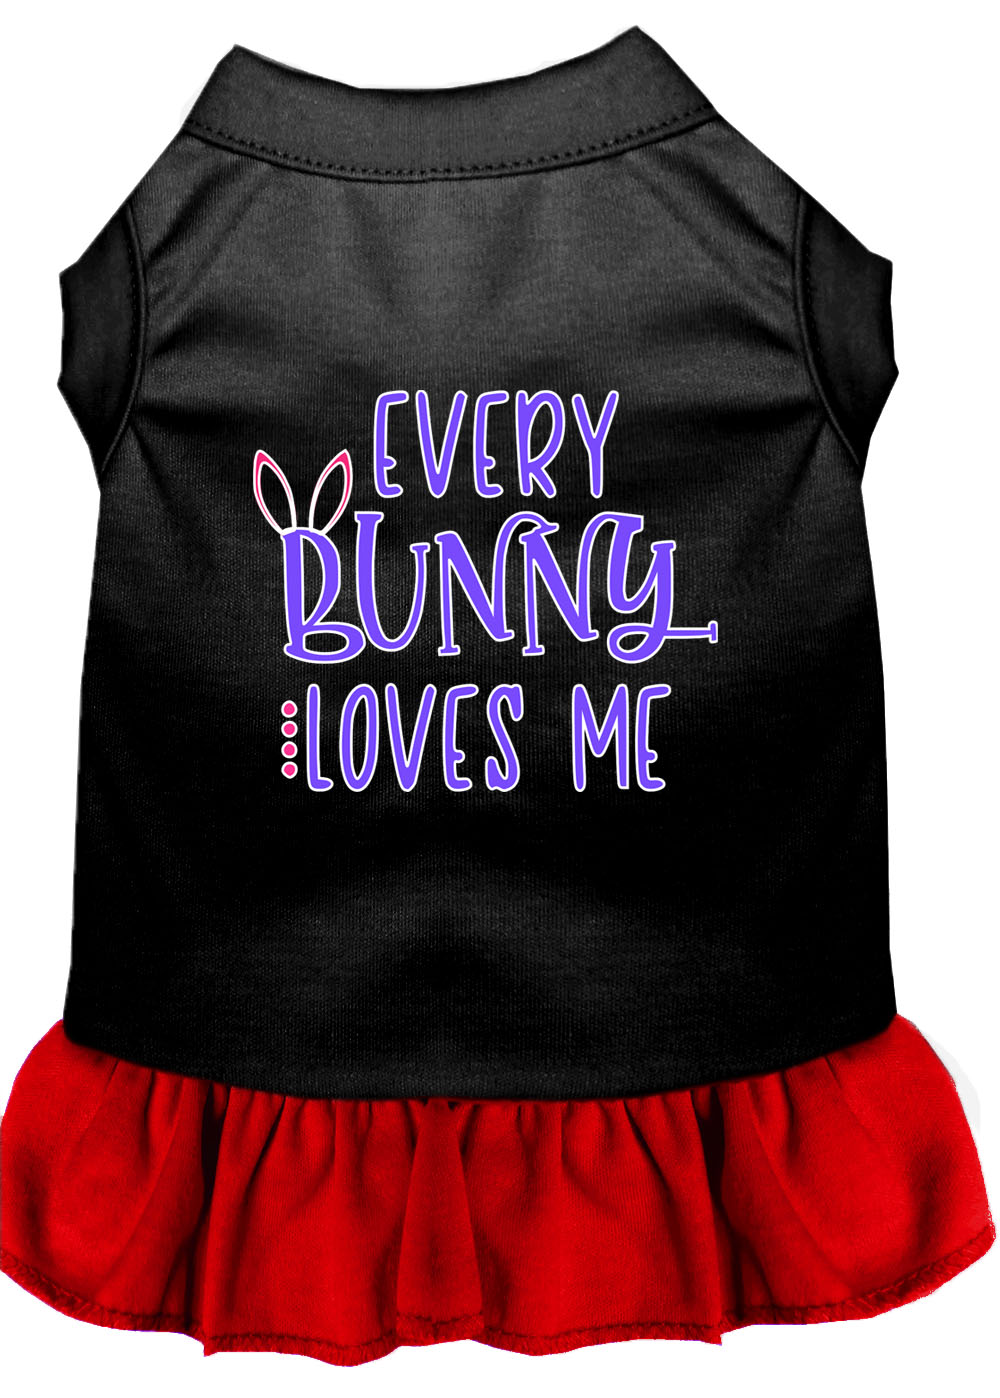 Every Bunny Loves me Screen Print Dog Dress Black with Red XXXL